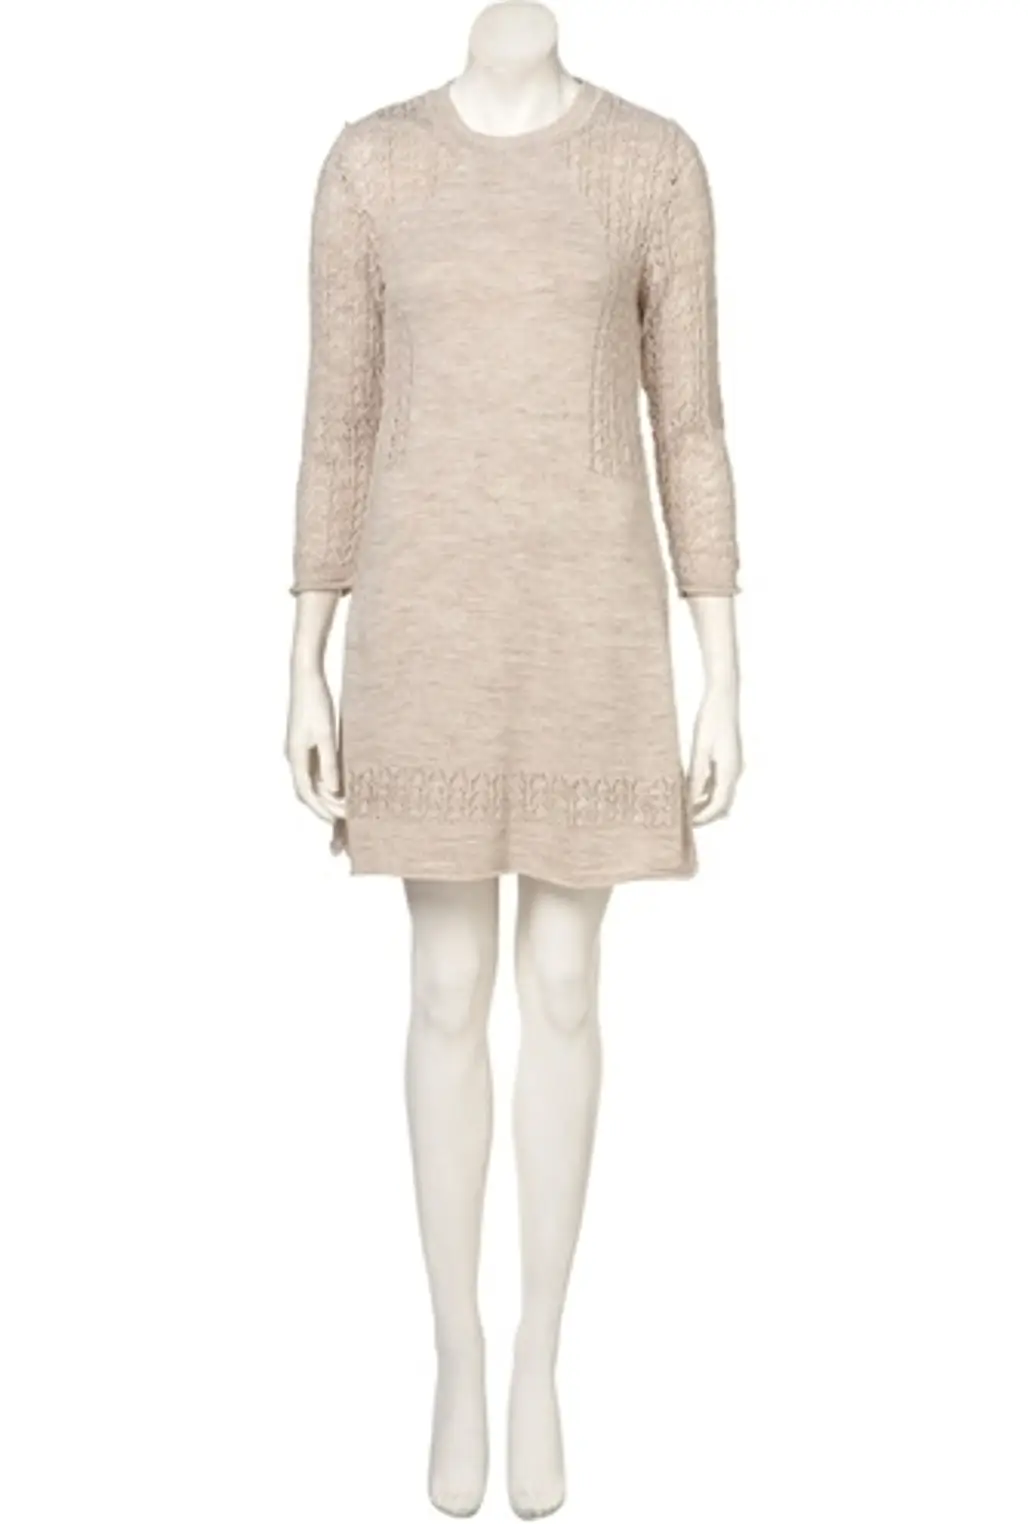 Topshop Knitted Pointelle Dress